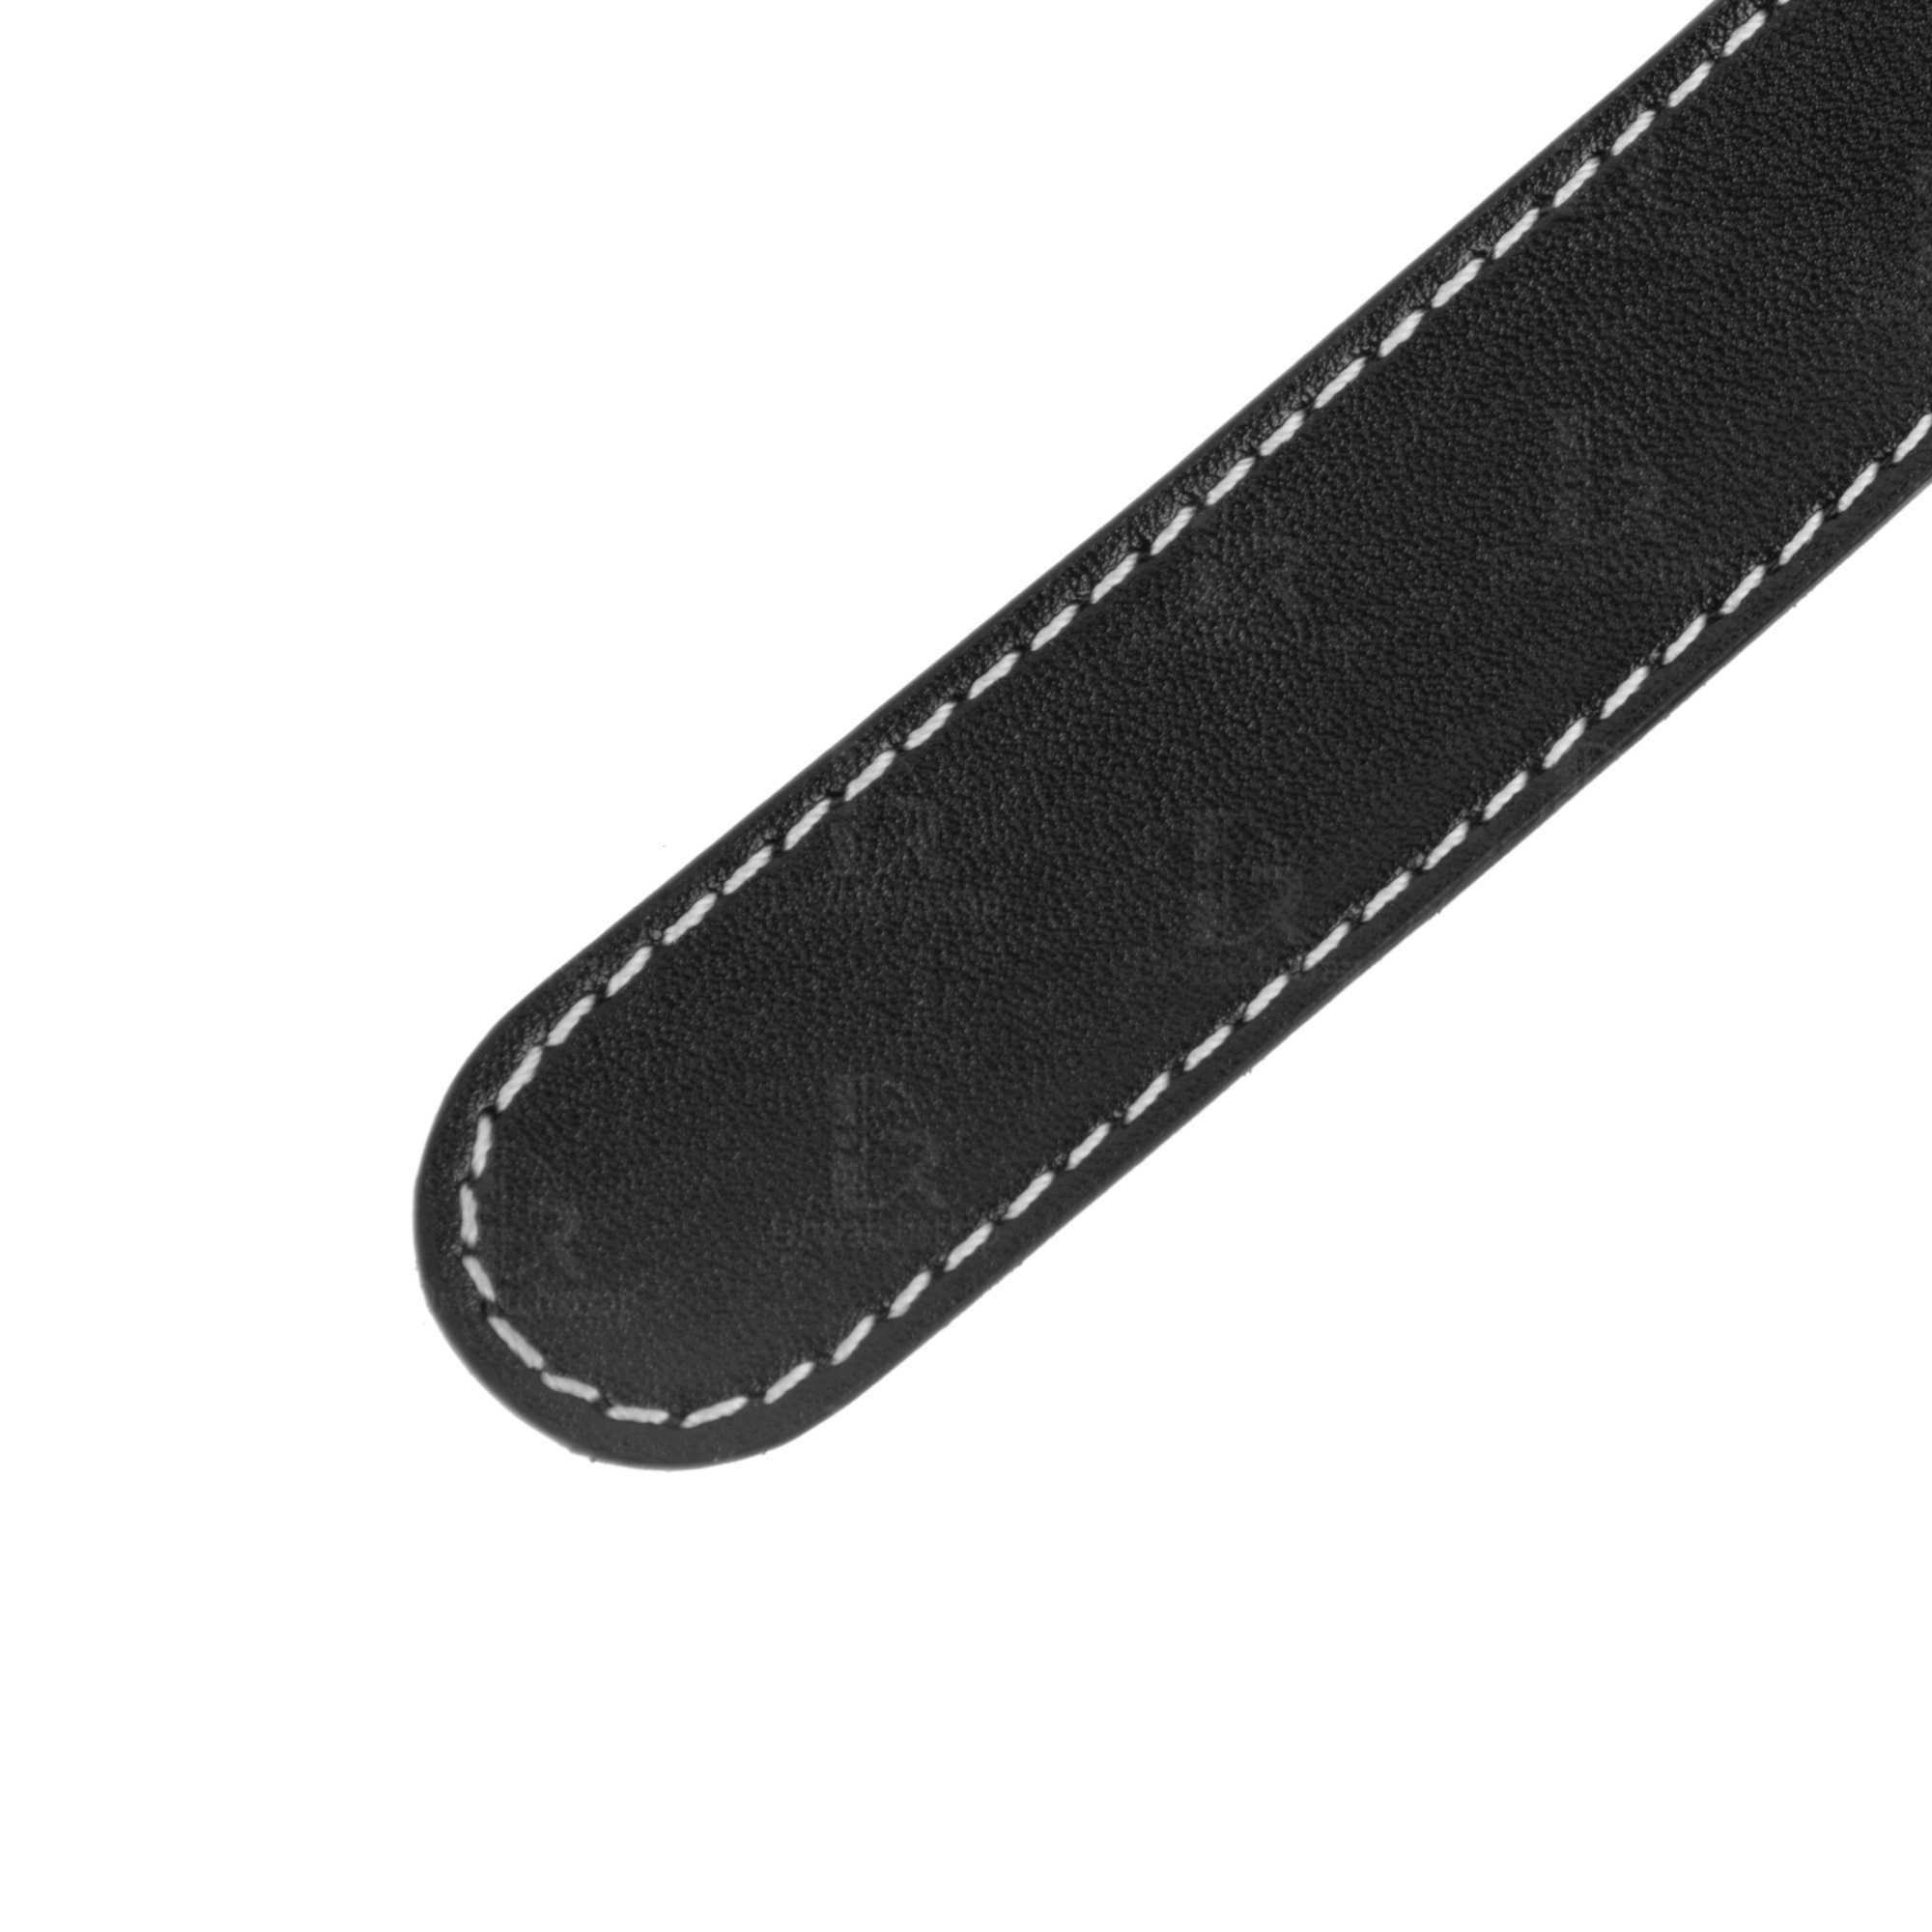 Full-stitched black leather with white stitching - strap for Oris BC4